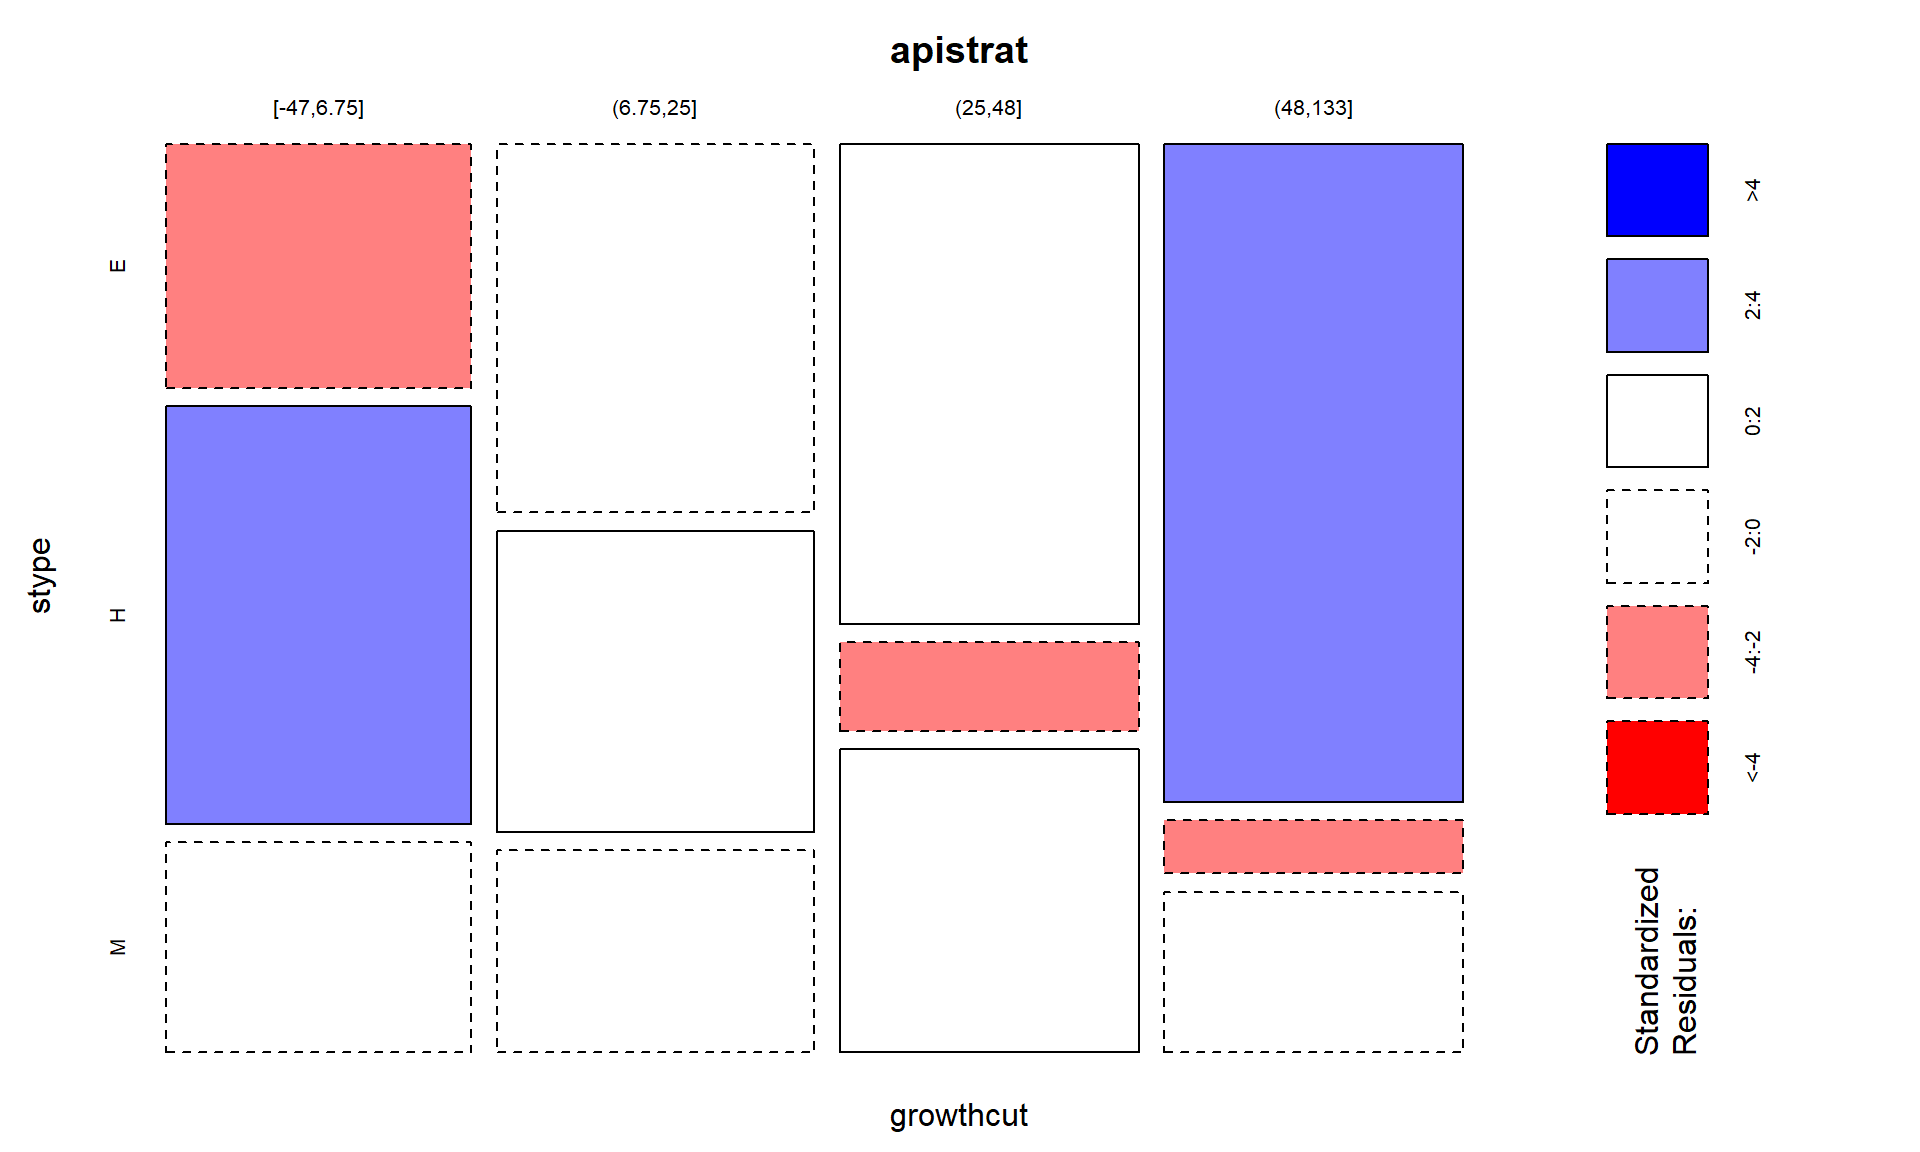 Mosaic plot of the API Growth rate categories versus level of the school with shading for size of standardized residuals.